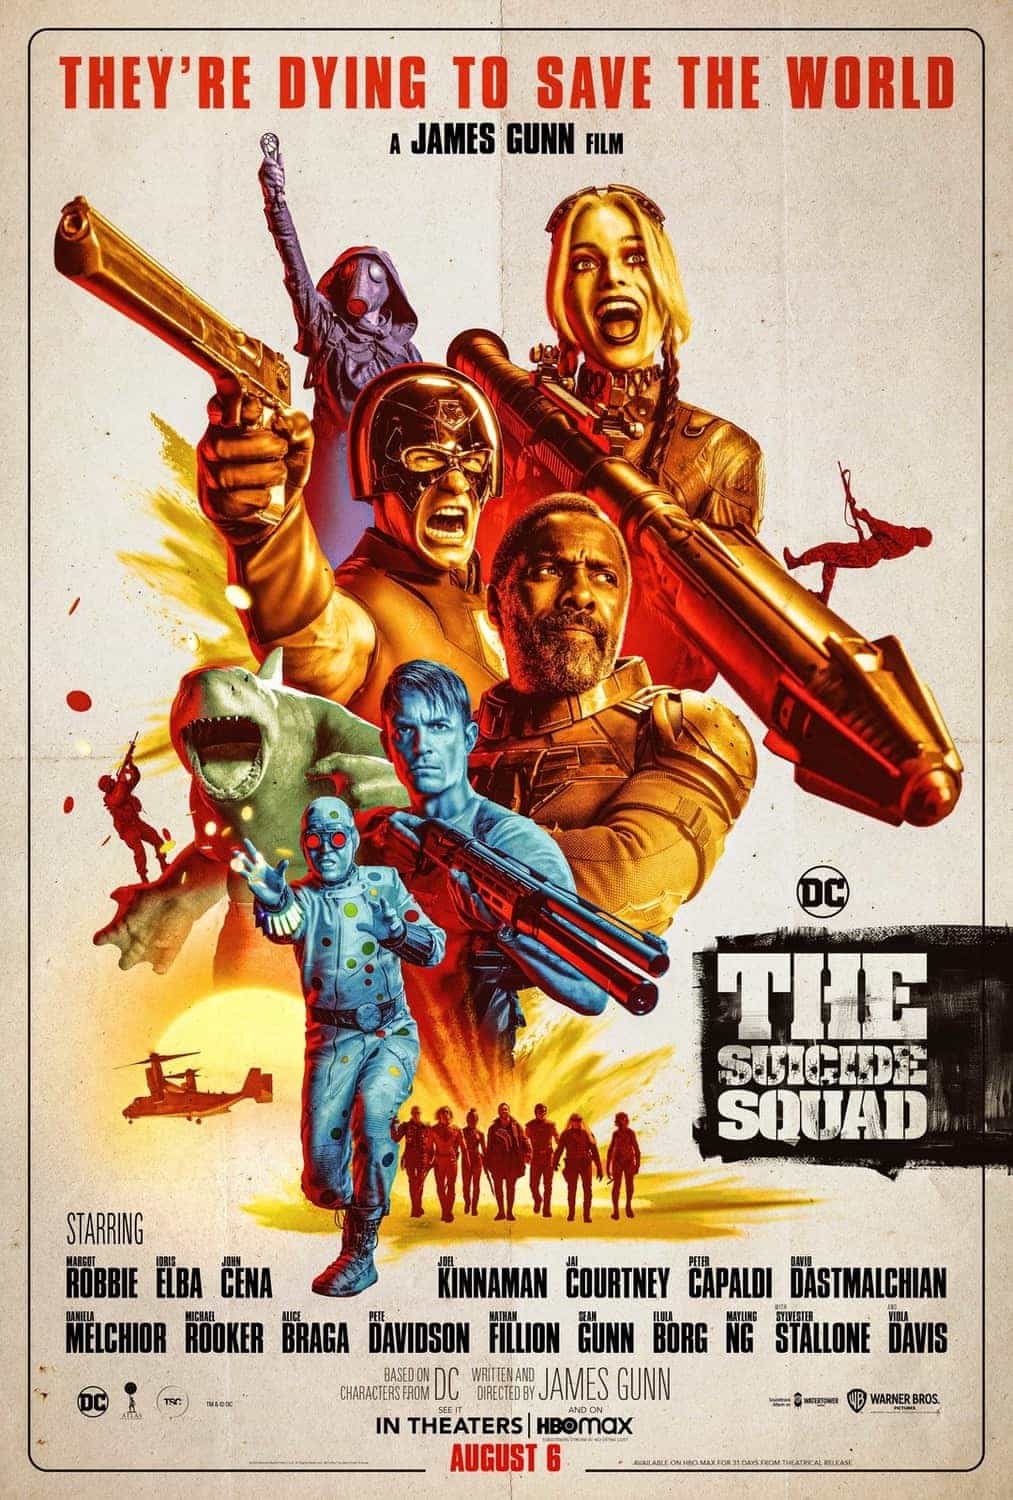 The Suicide Squad is given a 15 age rating in the UK for strong bloody violence, gore, language, brief drug misuse